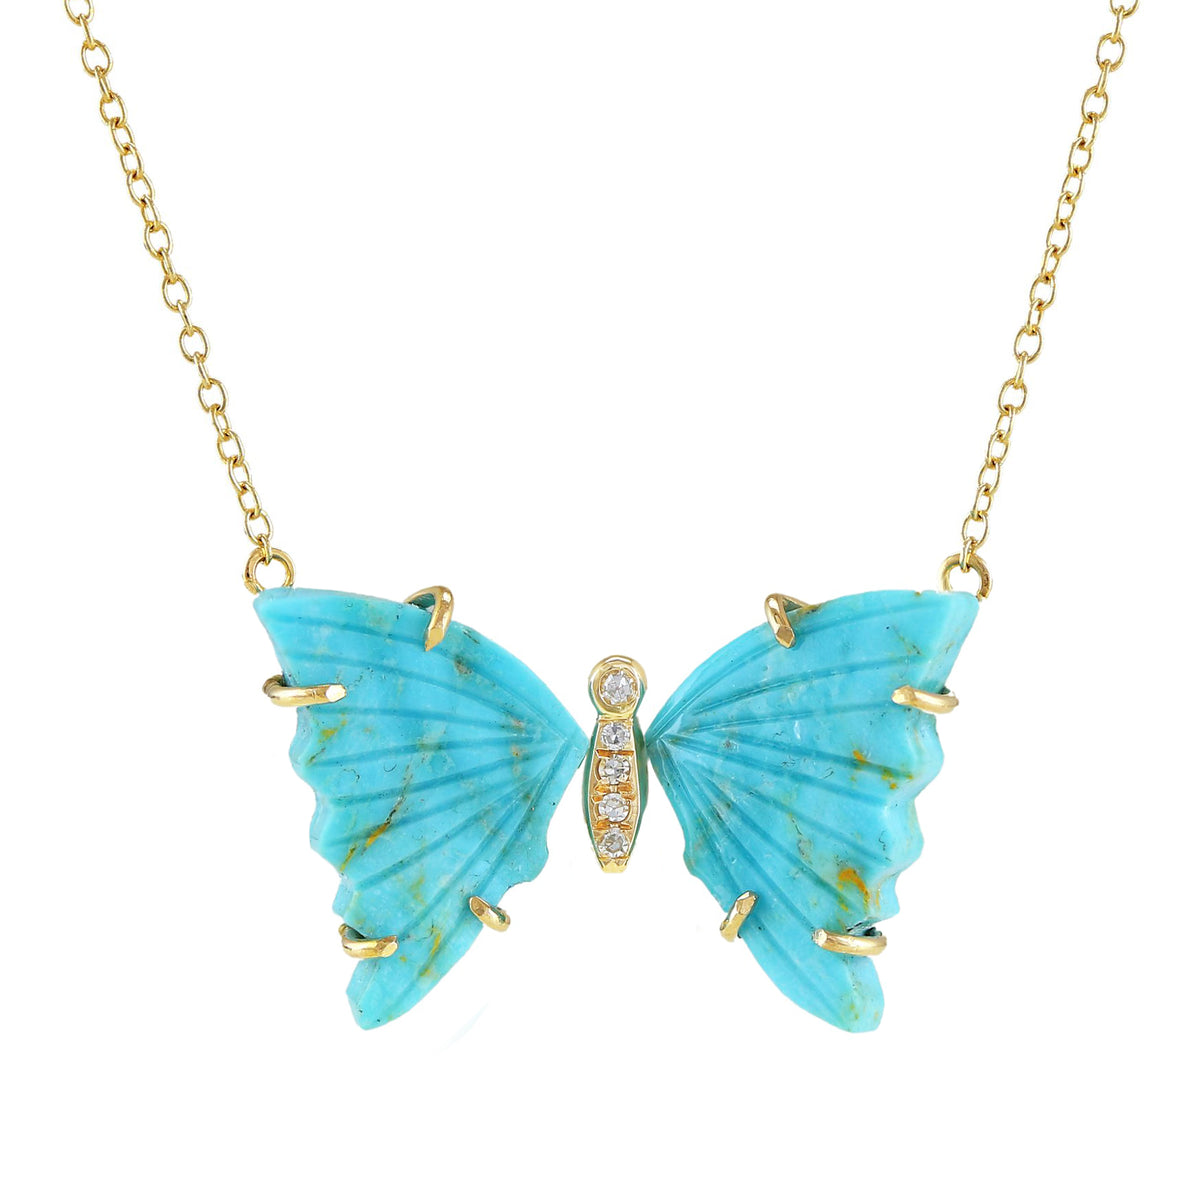 Turquoise Butterfly Necklace With Diamonds - KAMARIA